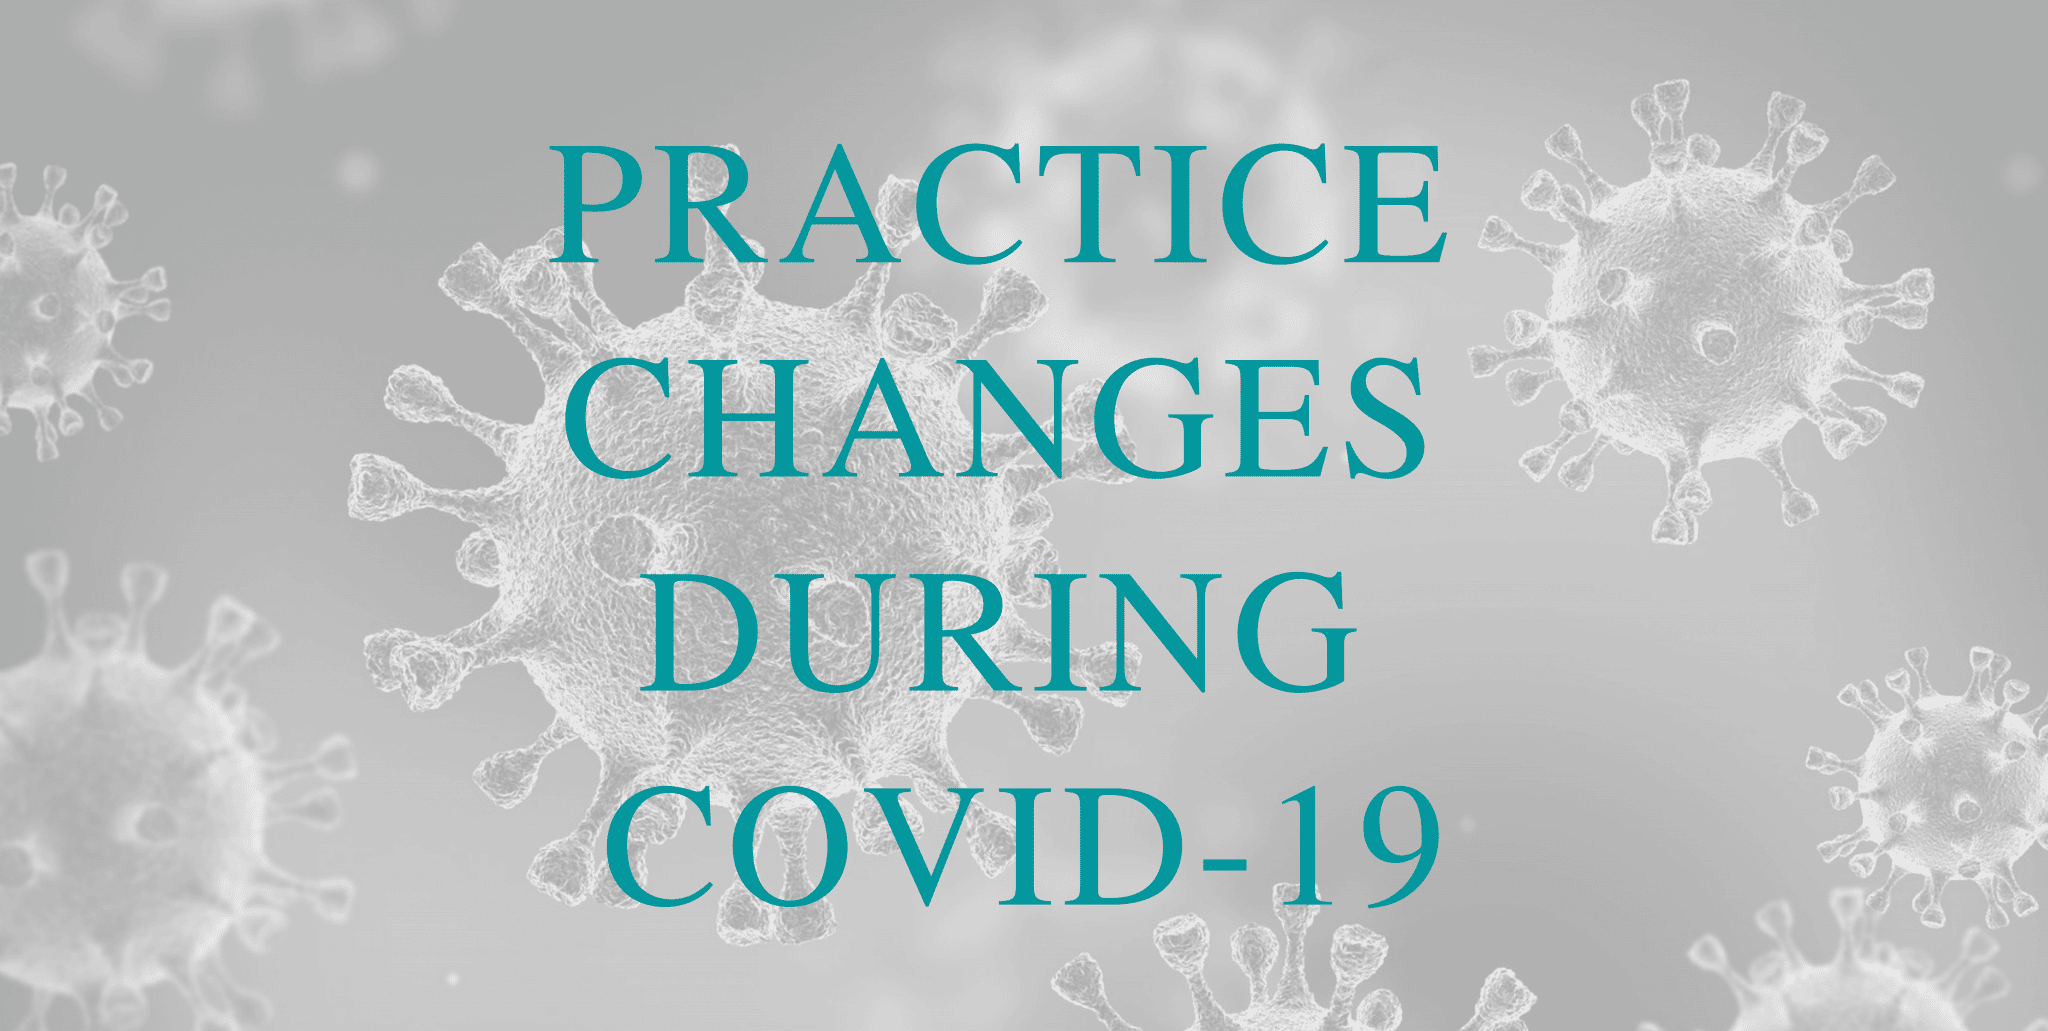 Practice Changes During COVID-19 for NHS Patients Thumbnail